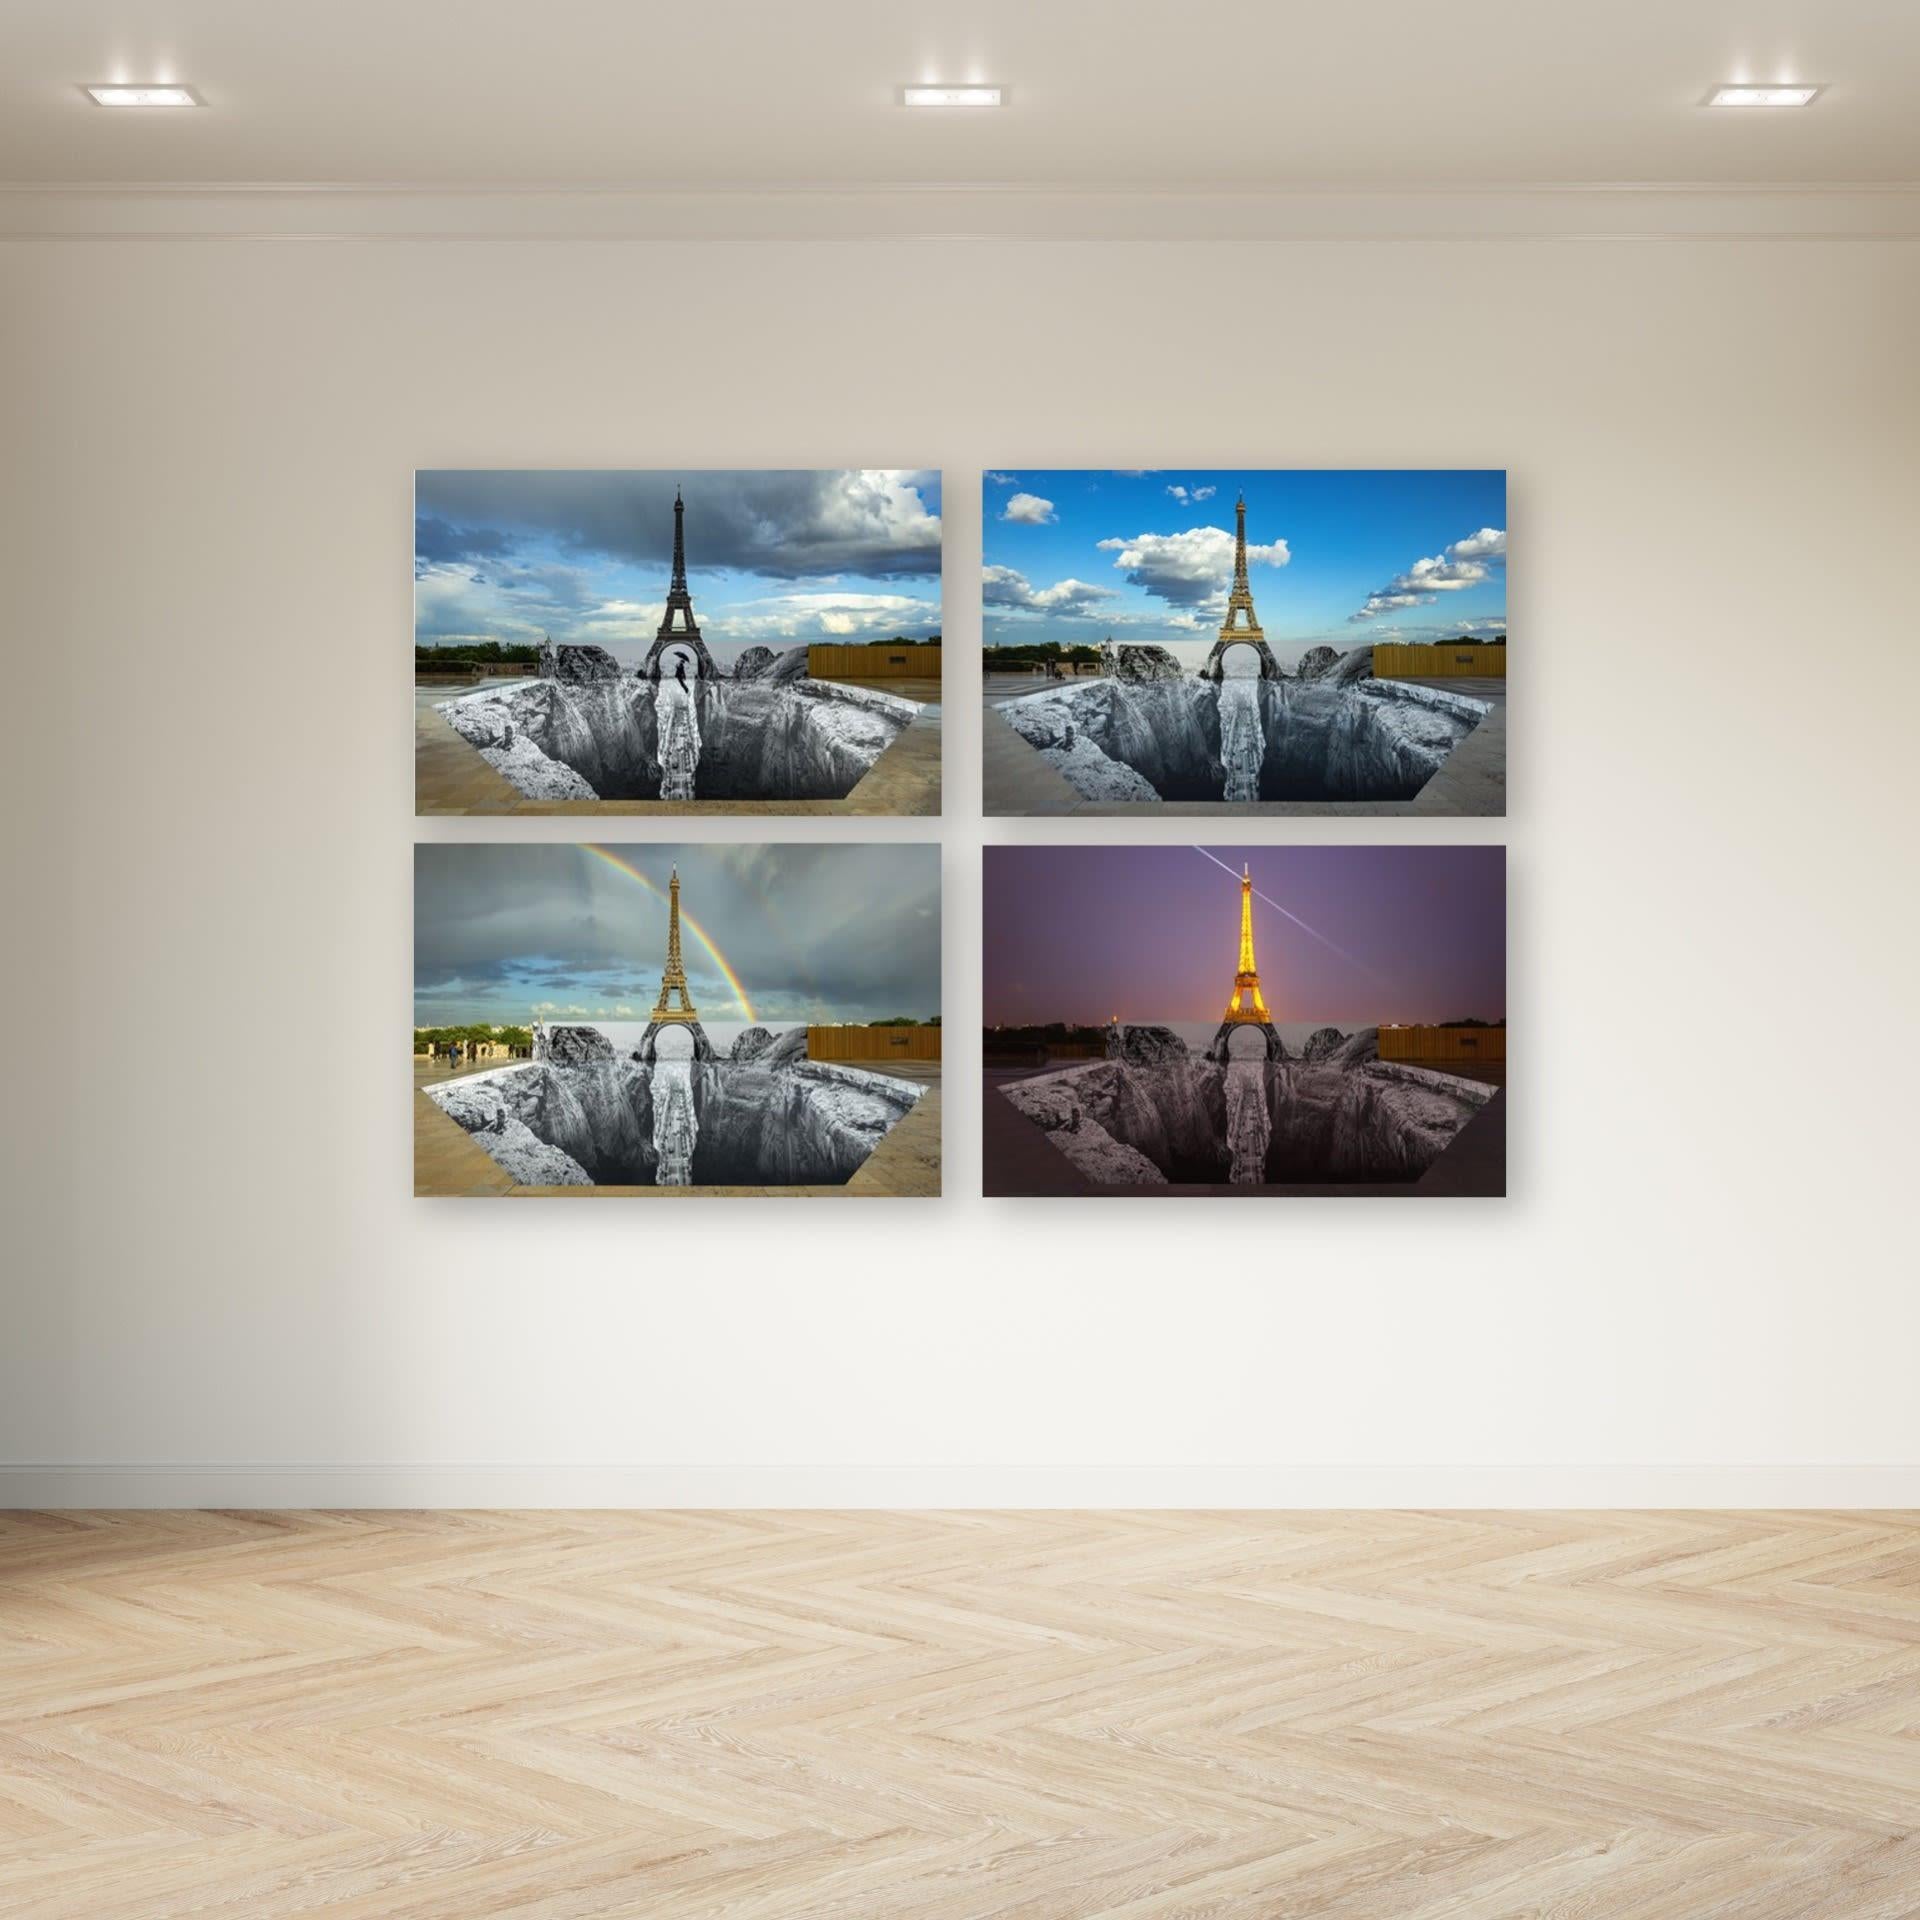 JR
Trompe l'oeil, Les Falaises du Trocadéro (Portfolio of 4)
2021
Giclée Print Laminated with G-gloss, Mounted on 3mm Dibond
64 × 96 cm
(25.2 × 37.8 in)
In matching edition numbers
In mint condition

Signed by JR on the bottom right corner (stamp